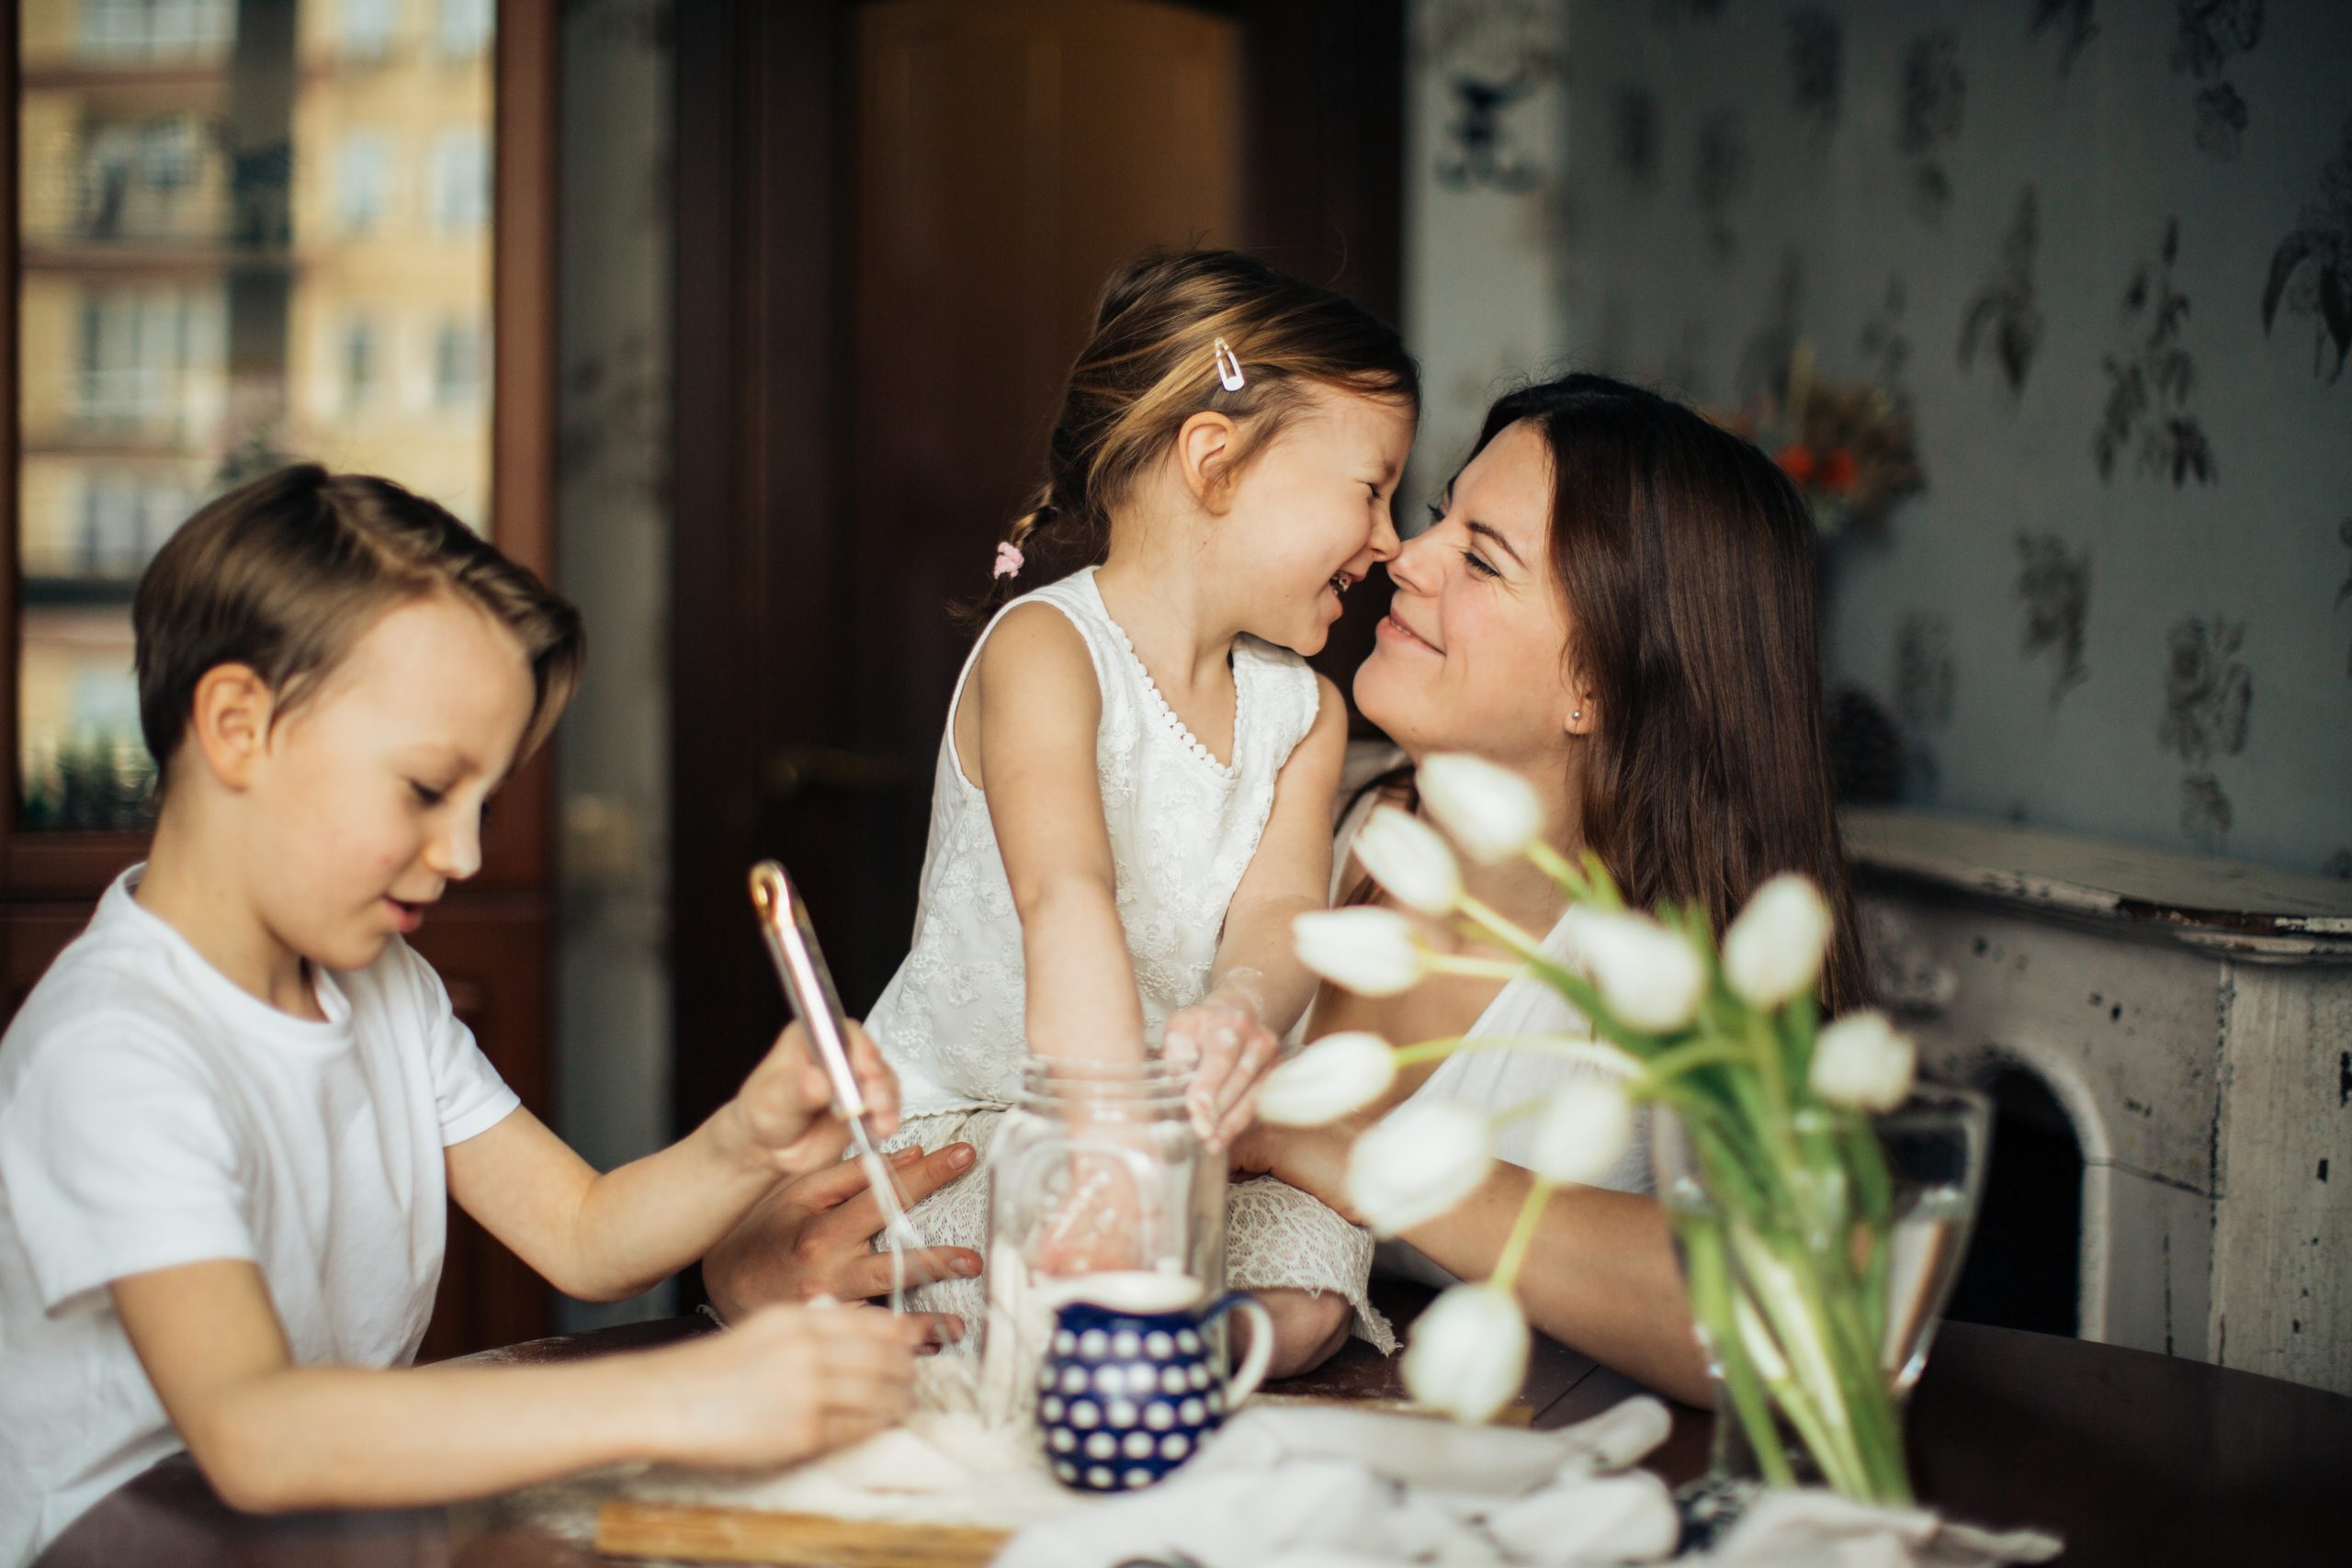 5 Great Gifts for Mother’s Day 2020